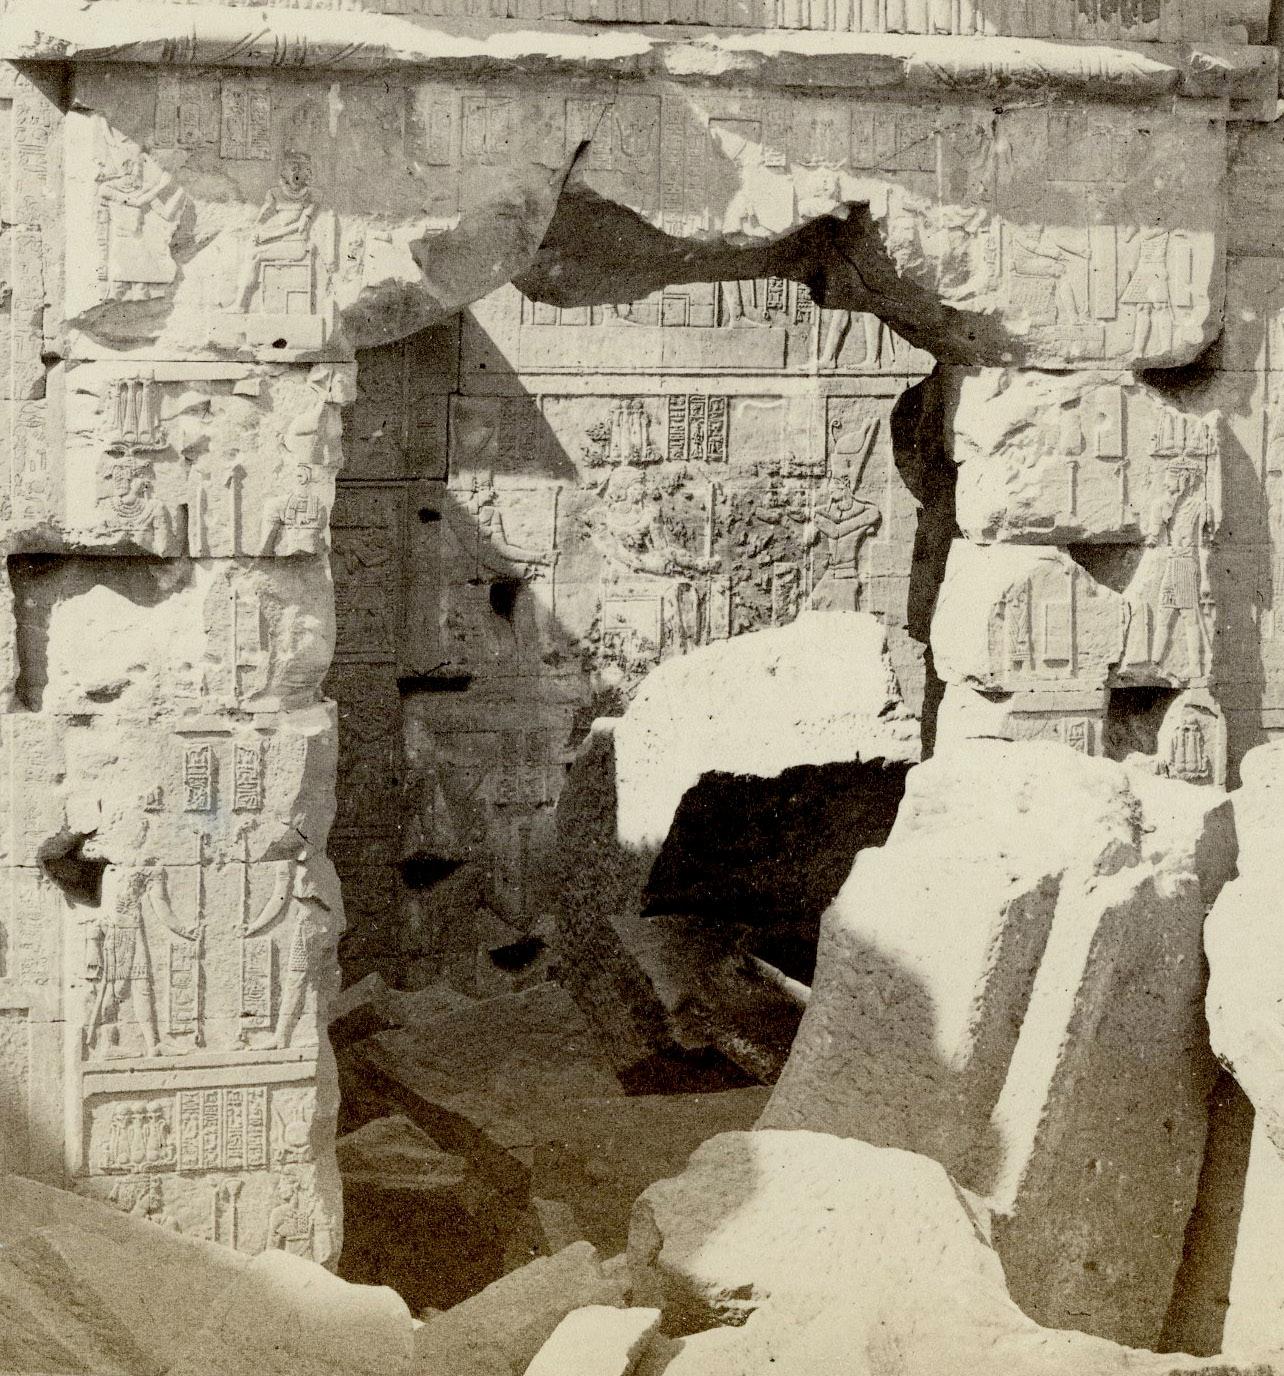 Doorway in the Temple of Kalabshe, Nubia - Photograph by Francis Frith